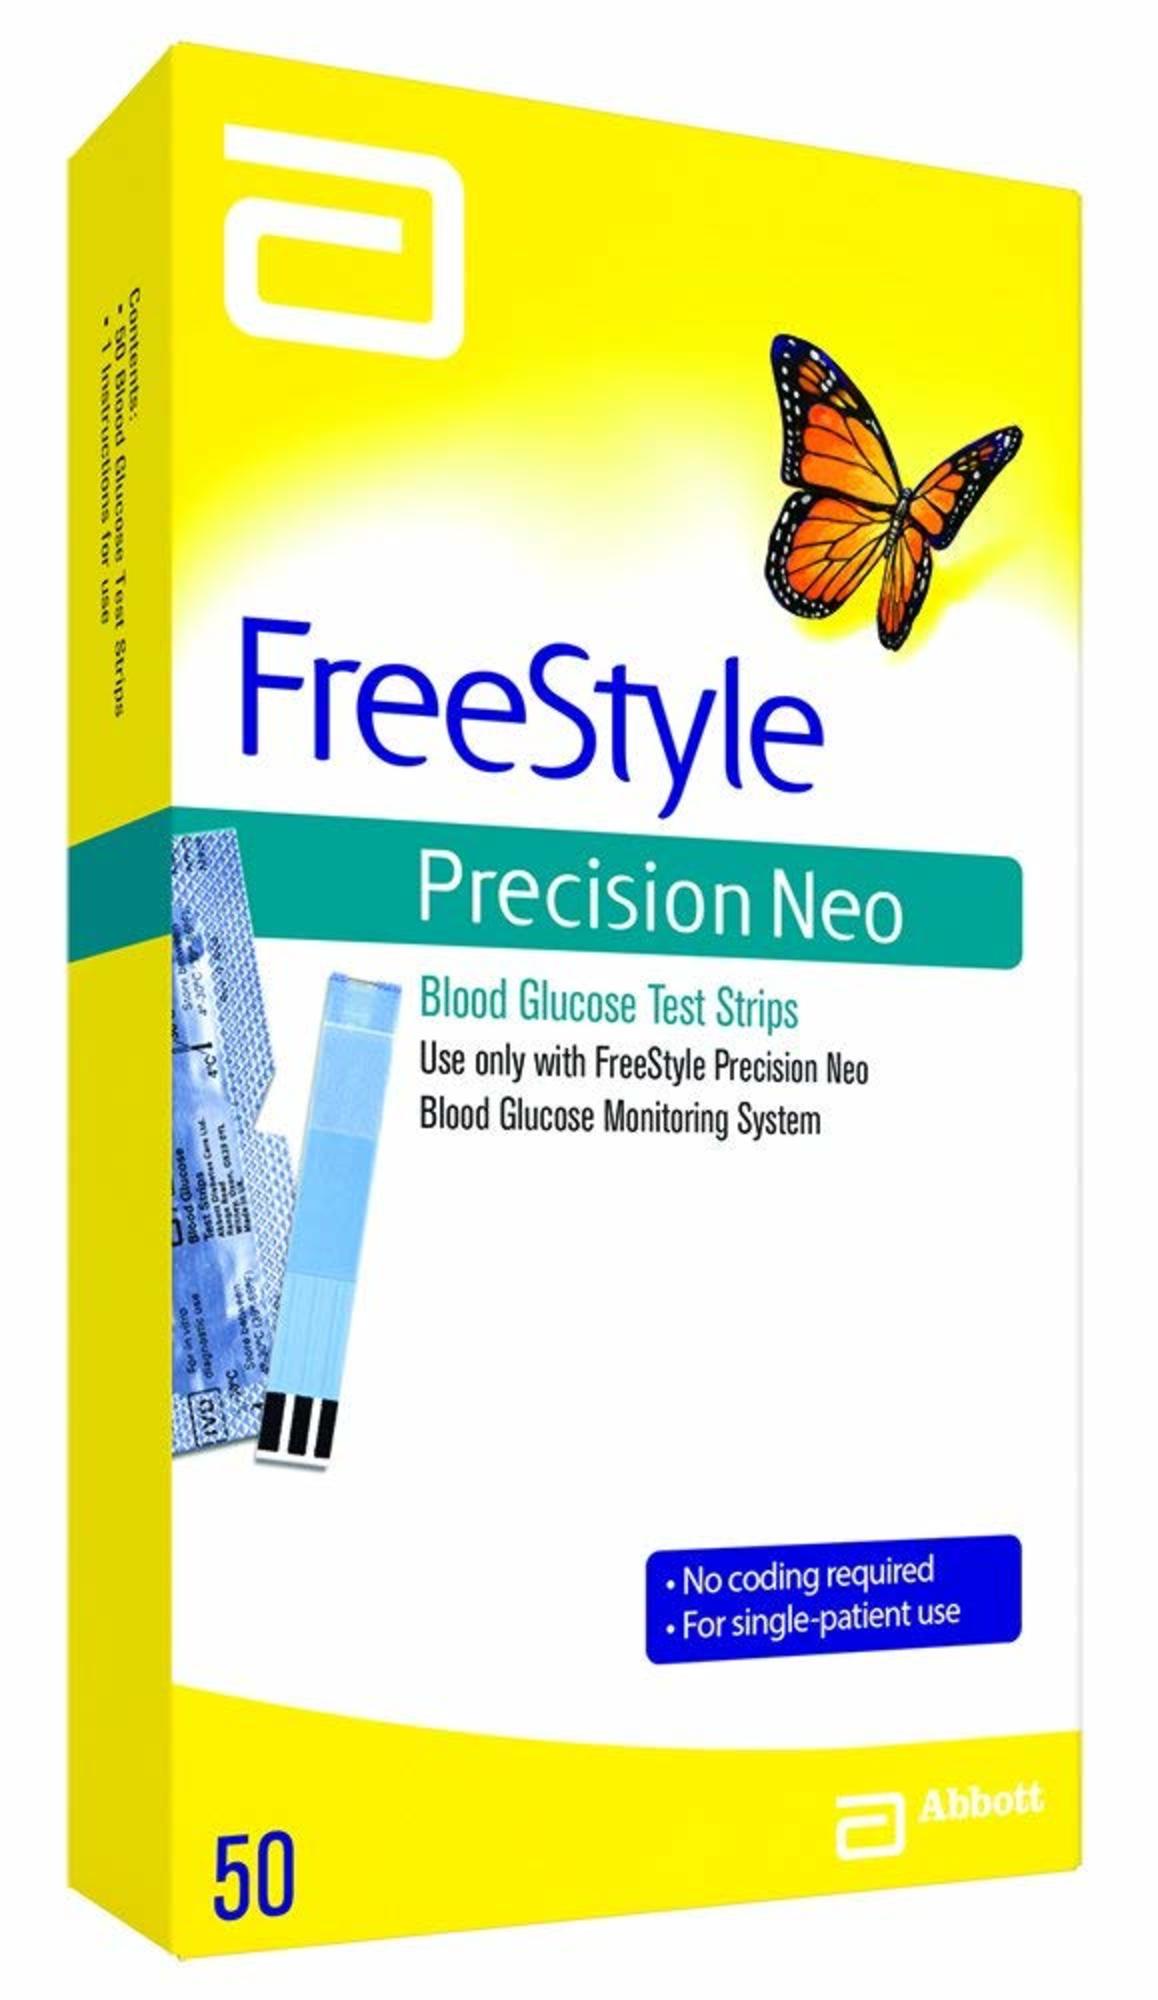 FreeStyle Precision Neo Blood Glucose Test Strips, 50 Count - image 2 of 4